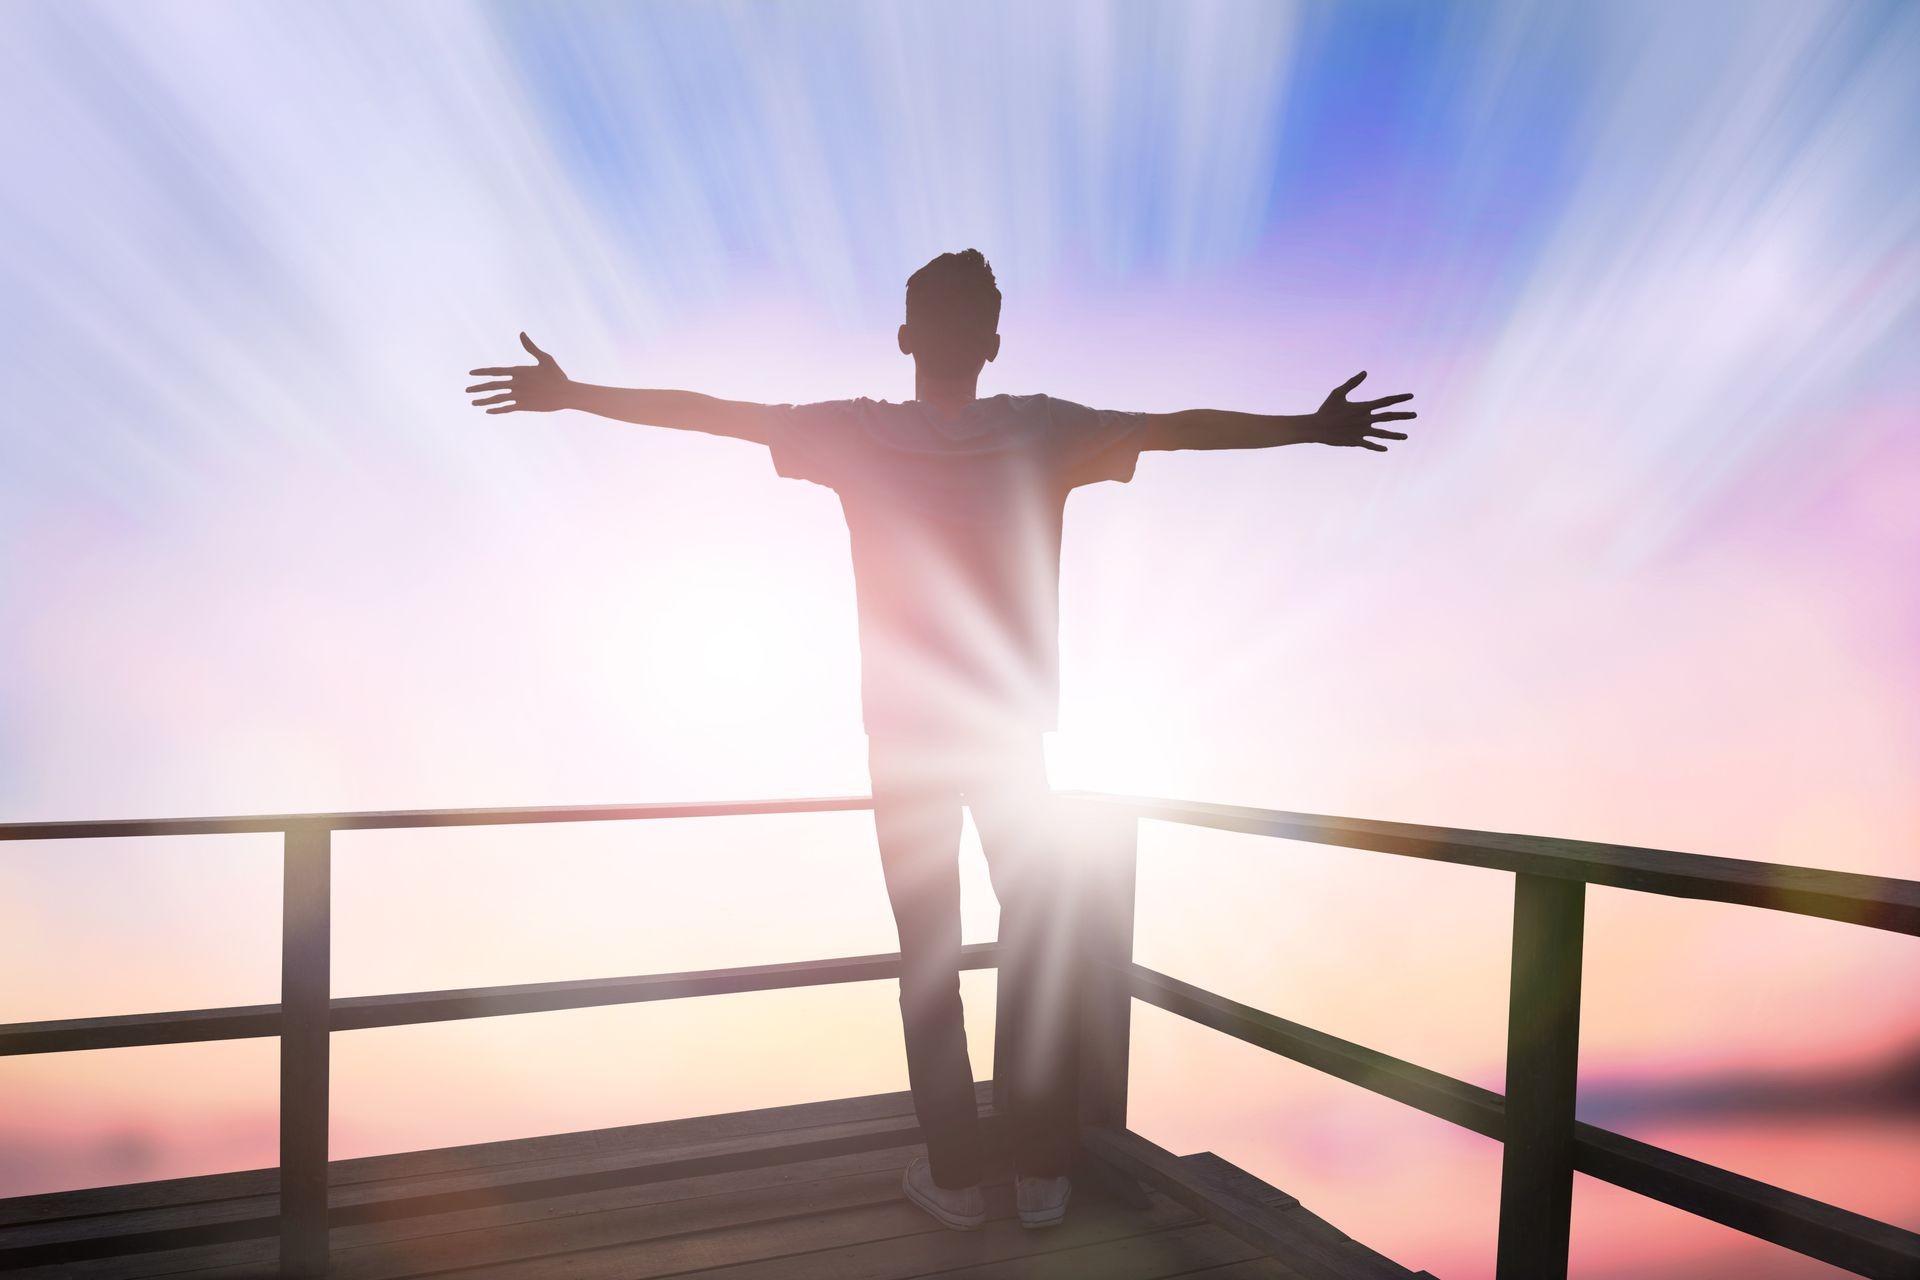 Humble man and hands rise up on beautiful morning background concept for self confidence in relax emotional, he risen from wellbeing and have a good day, Christian stocker hope in financial freedom, 